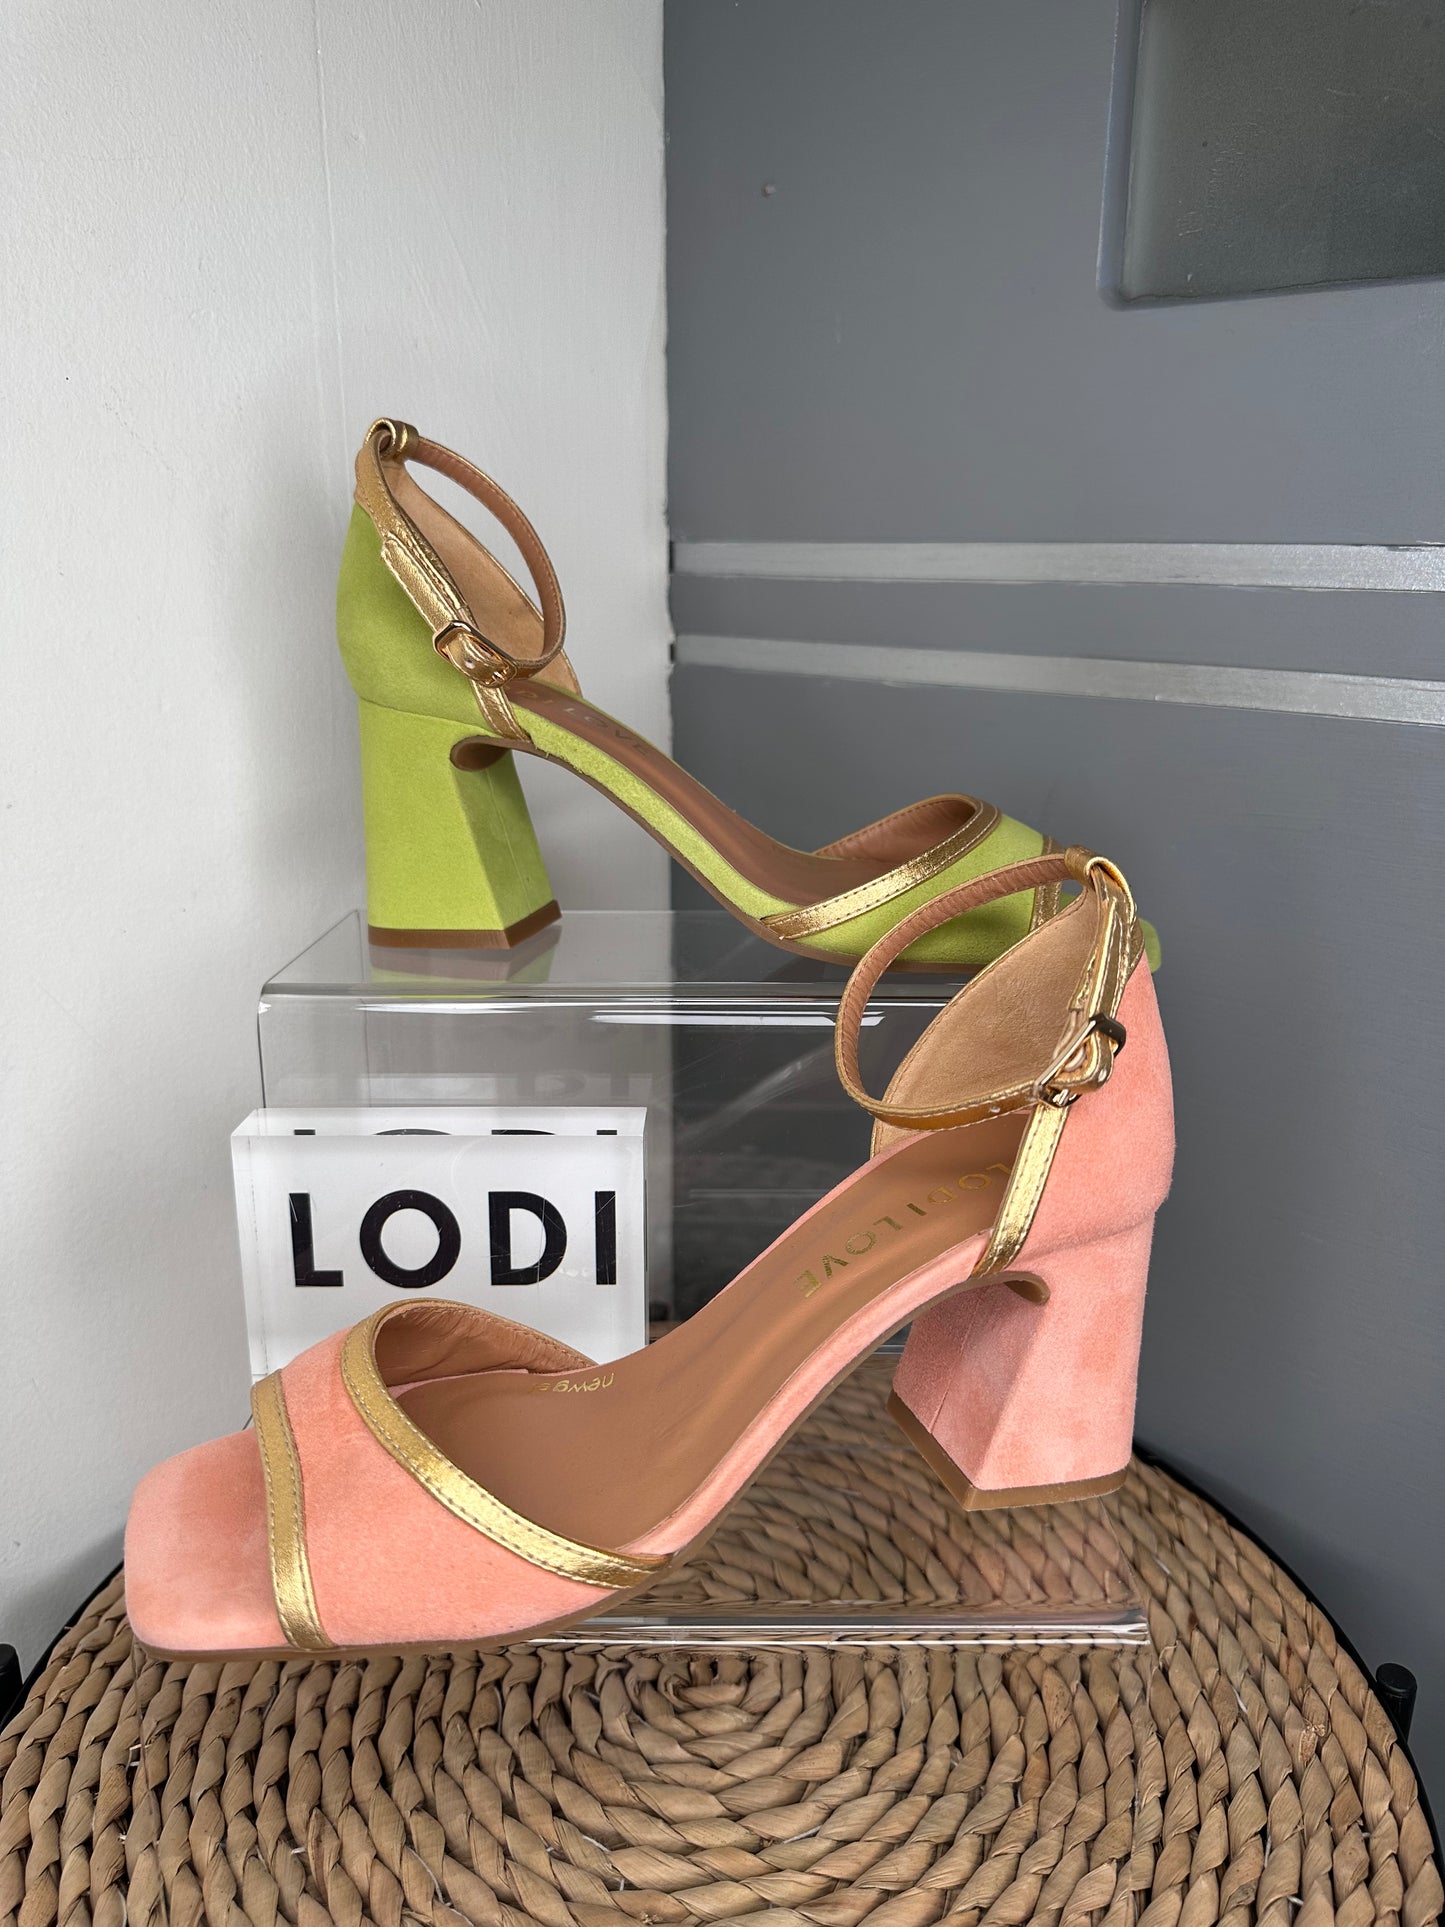 Lodi (Love) - Lime Green Suede Sandal With Gold Trim & Block Heel